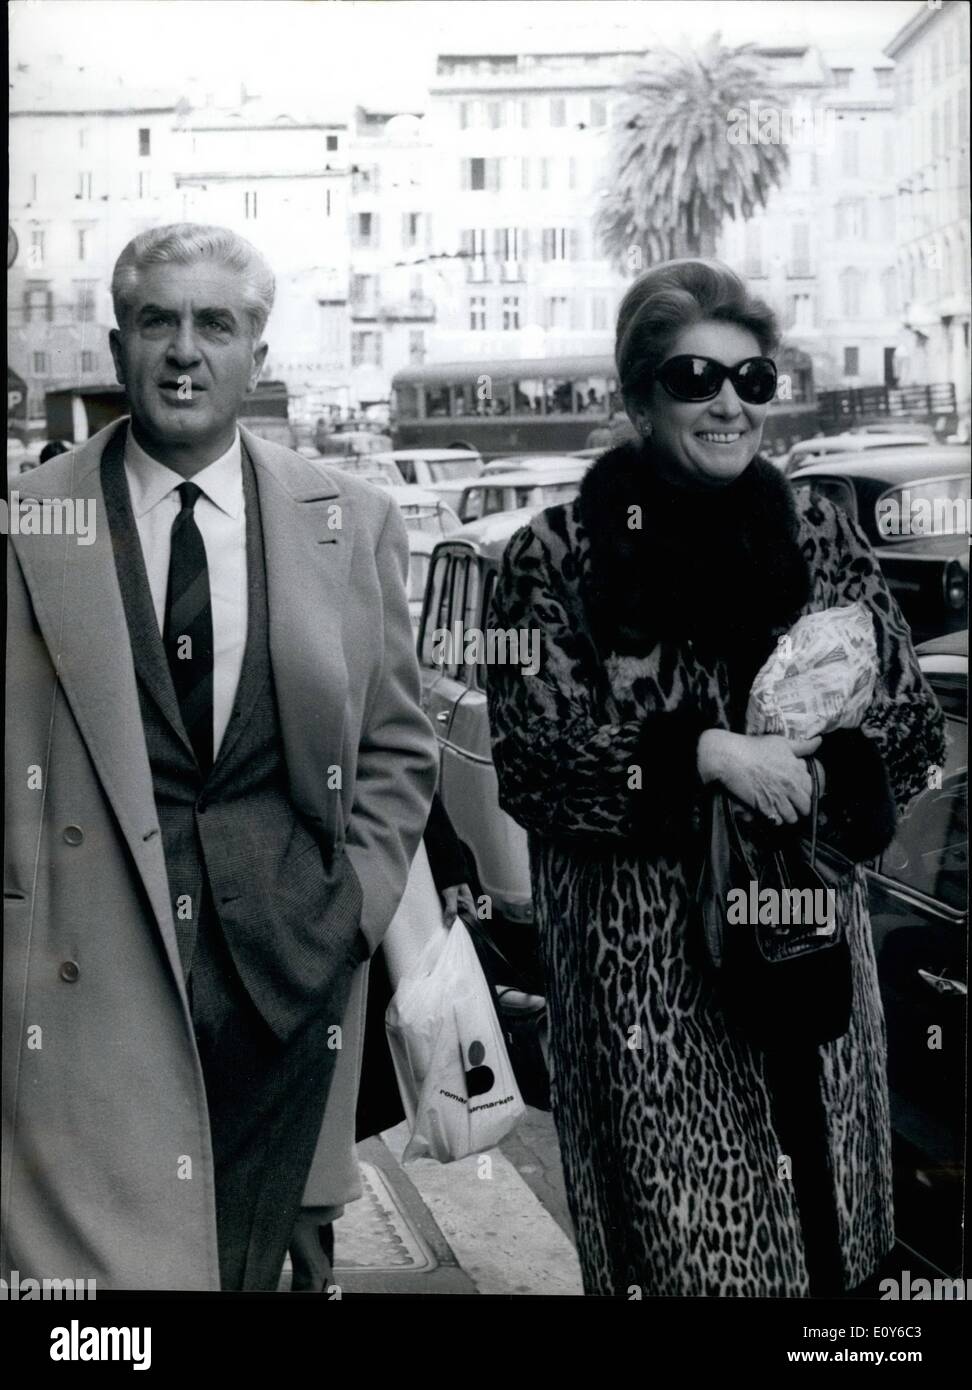 Dec. 12, 1968 - While her divorced husband is awaiting a baby from the actress Sophia Loren, Mrs Giuliana Flastri is walking the street accompnaied by her friends, the pilot capt, Marcelo Mainetti. Mrs. Giuliana Flastri is the divorced wife of Carlo Ponti, the producer, actually Hopia Loren's husband. Stock Photo